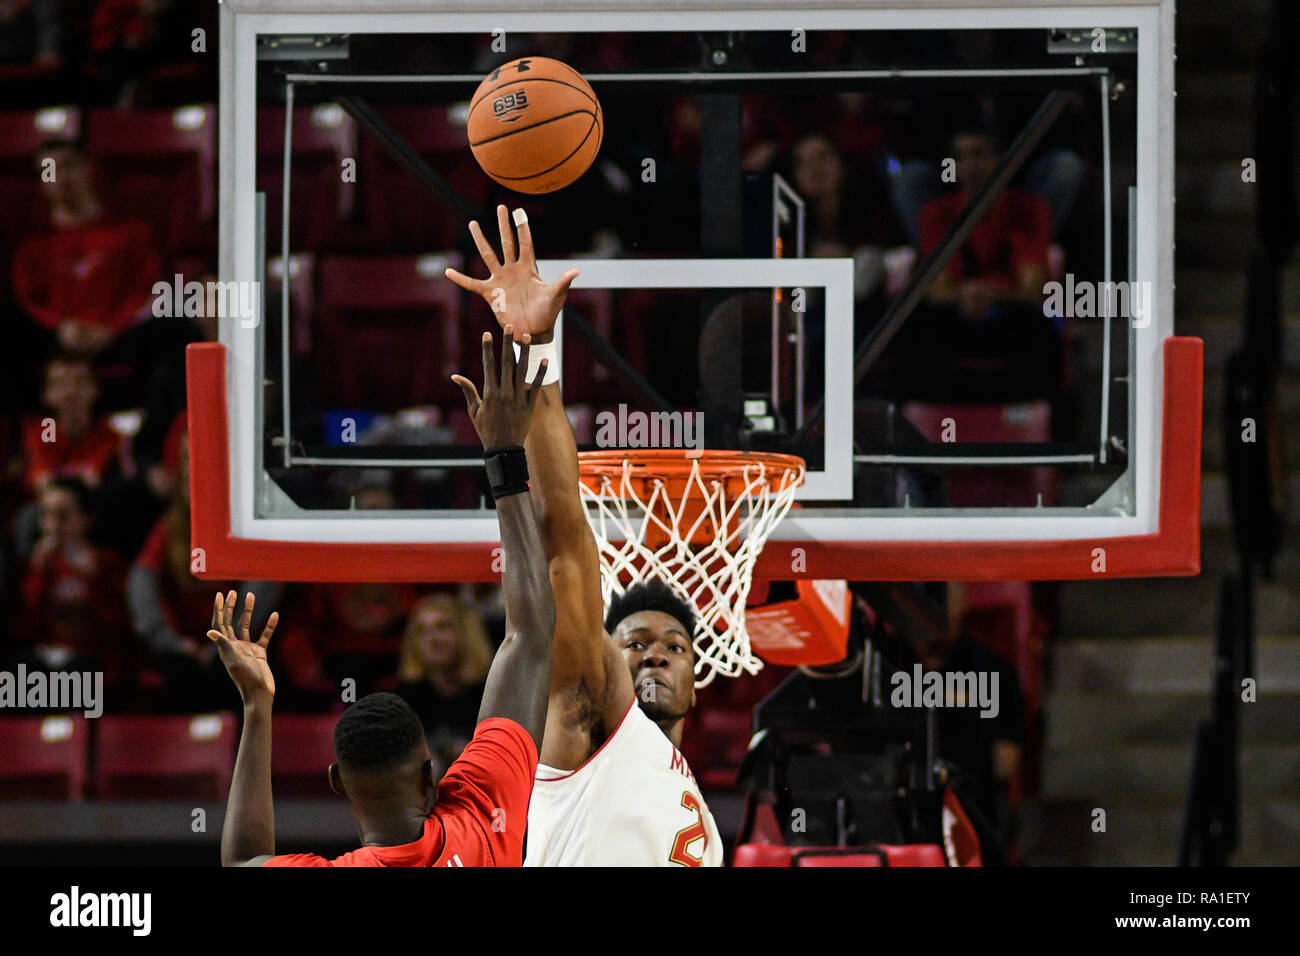 Maryland, USA. 29th Dec, 2018. BRUNO FERNANDO (23) defends against MAWDO SALLAH (20) during the game held at XFINITY Center in College Park, Maryland. Credit: Amy Sanderson/ZUMA Wire/Alamy Live News Stock Photo